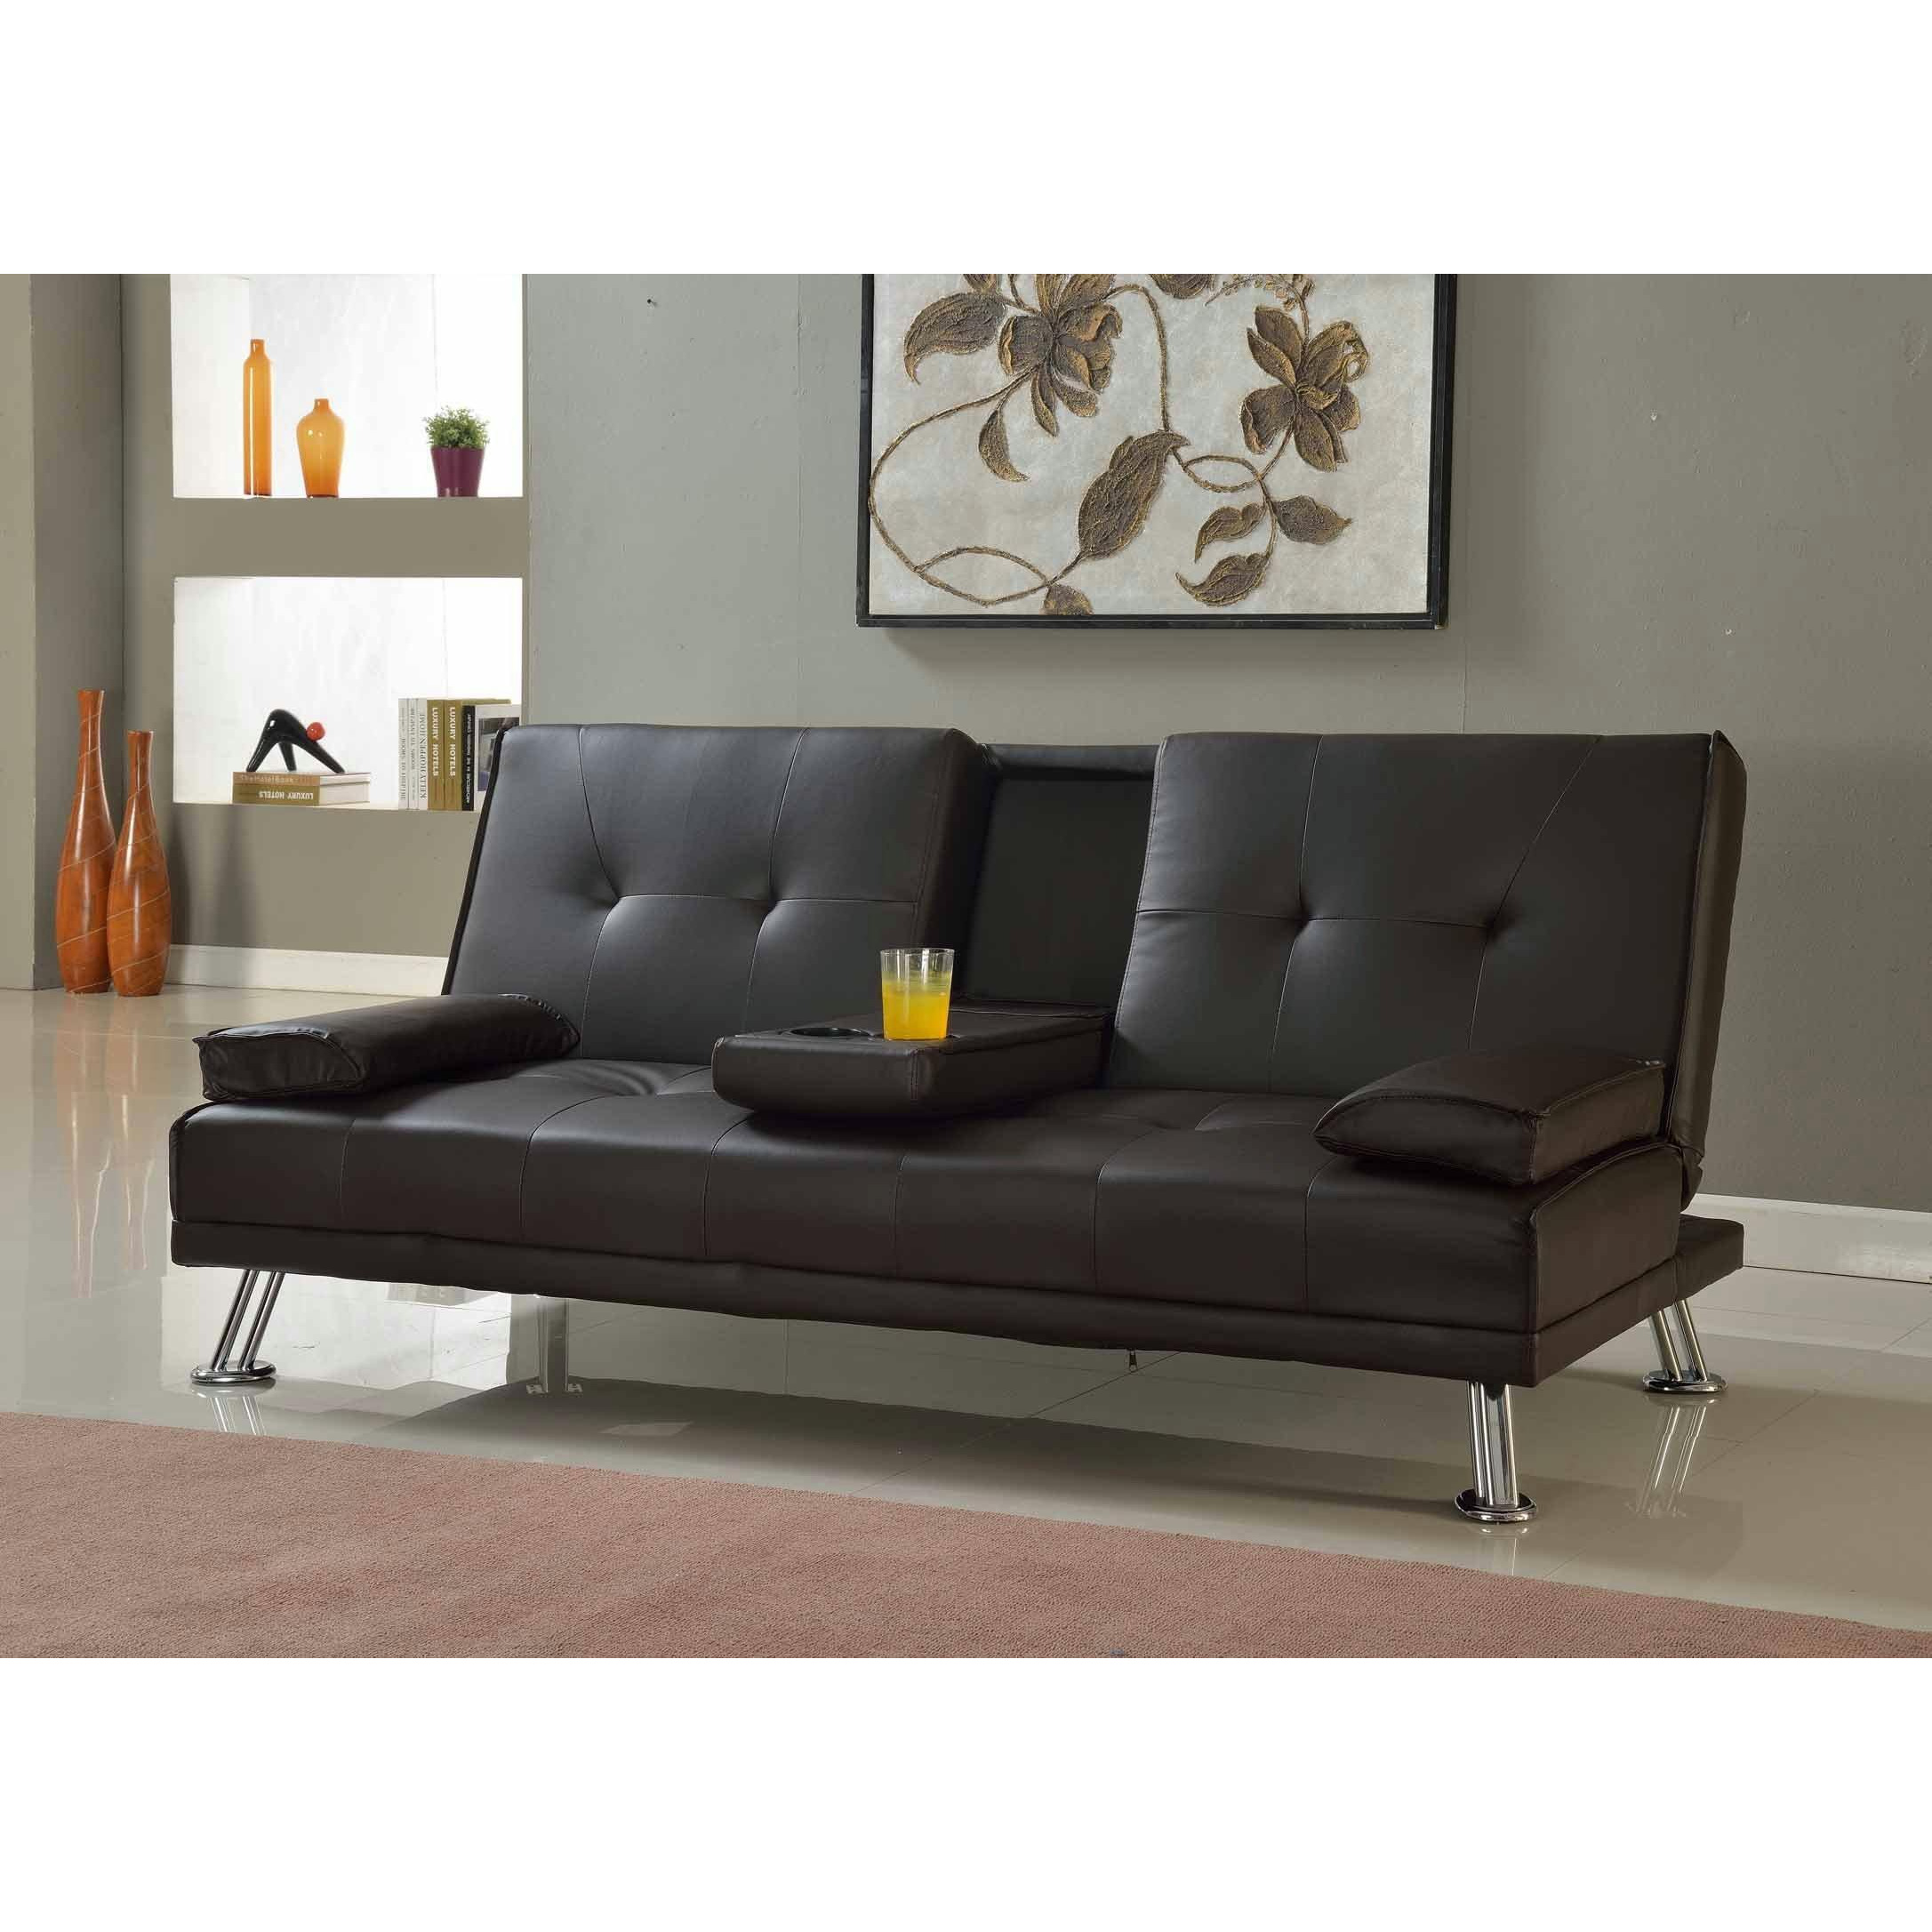 Indiana Faux Leather Sofa Bed With Pulldown Cupholder and Chrome Legs - image 1